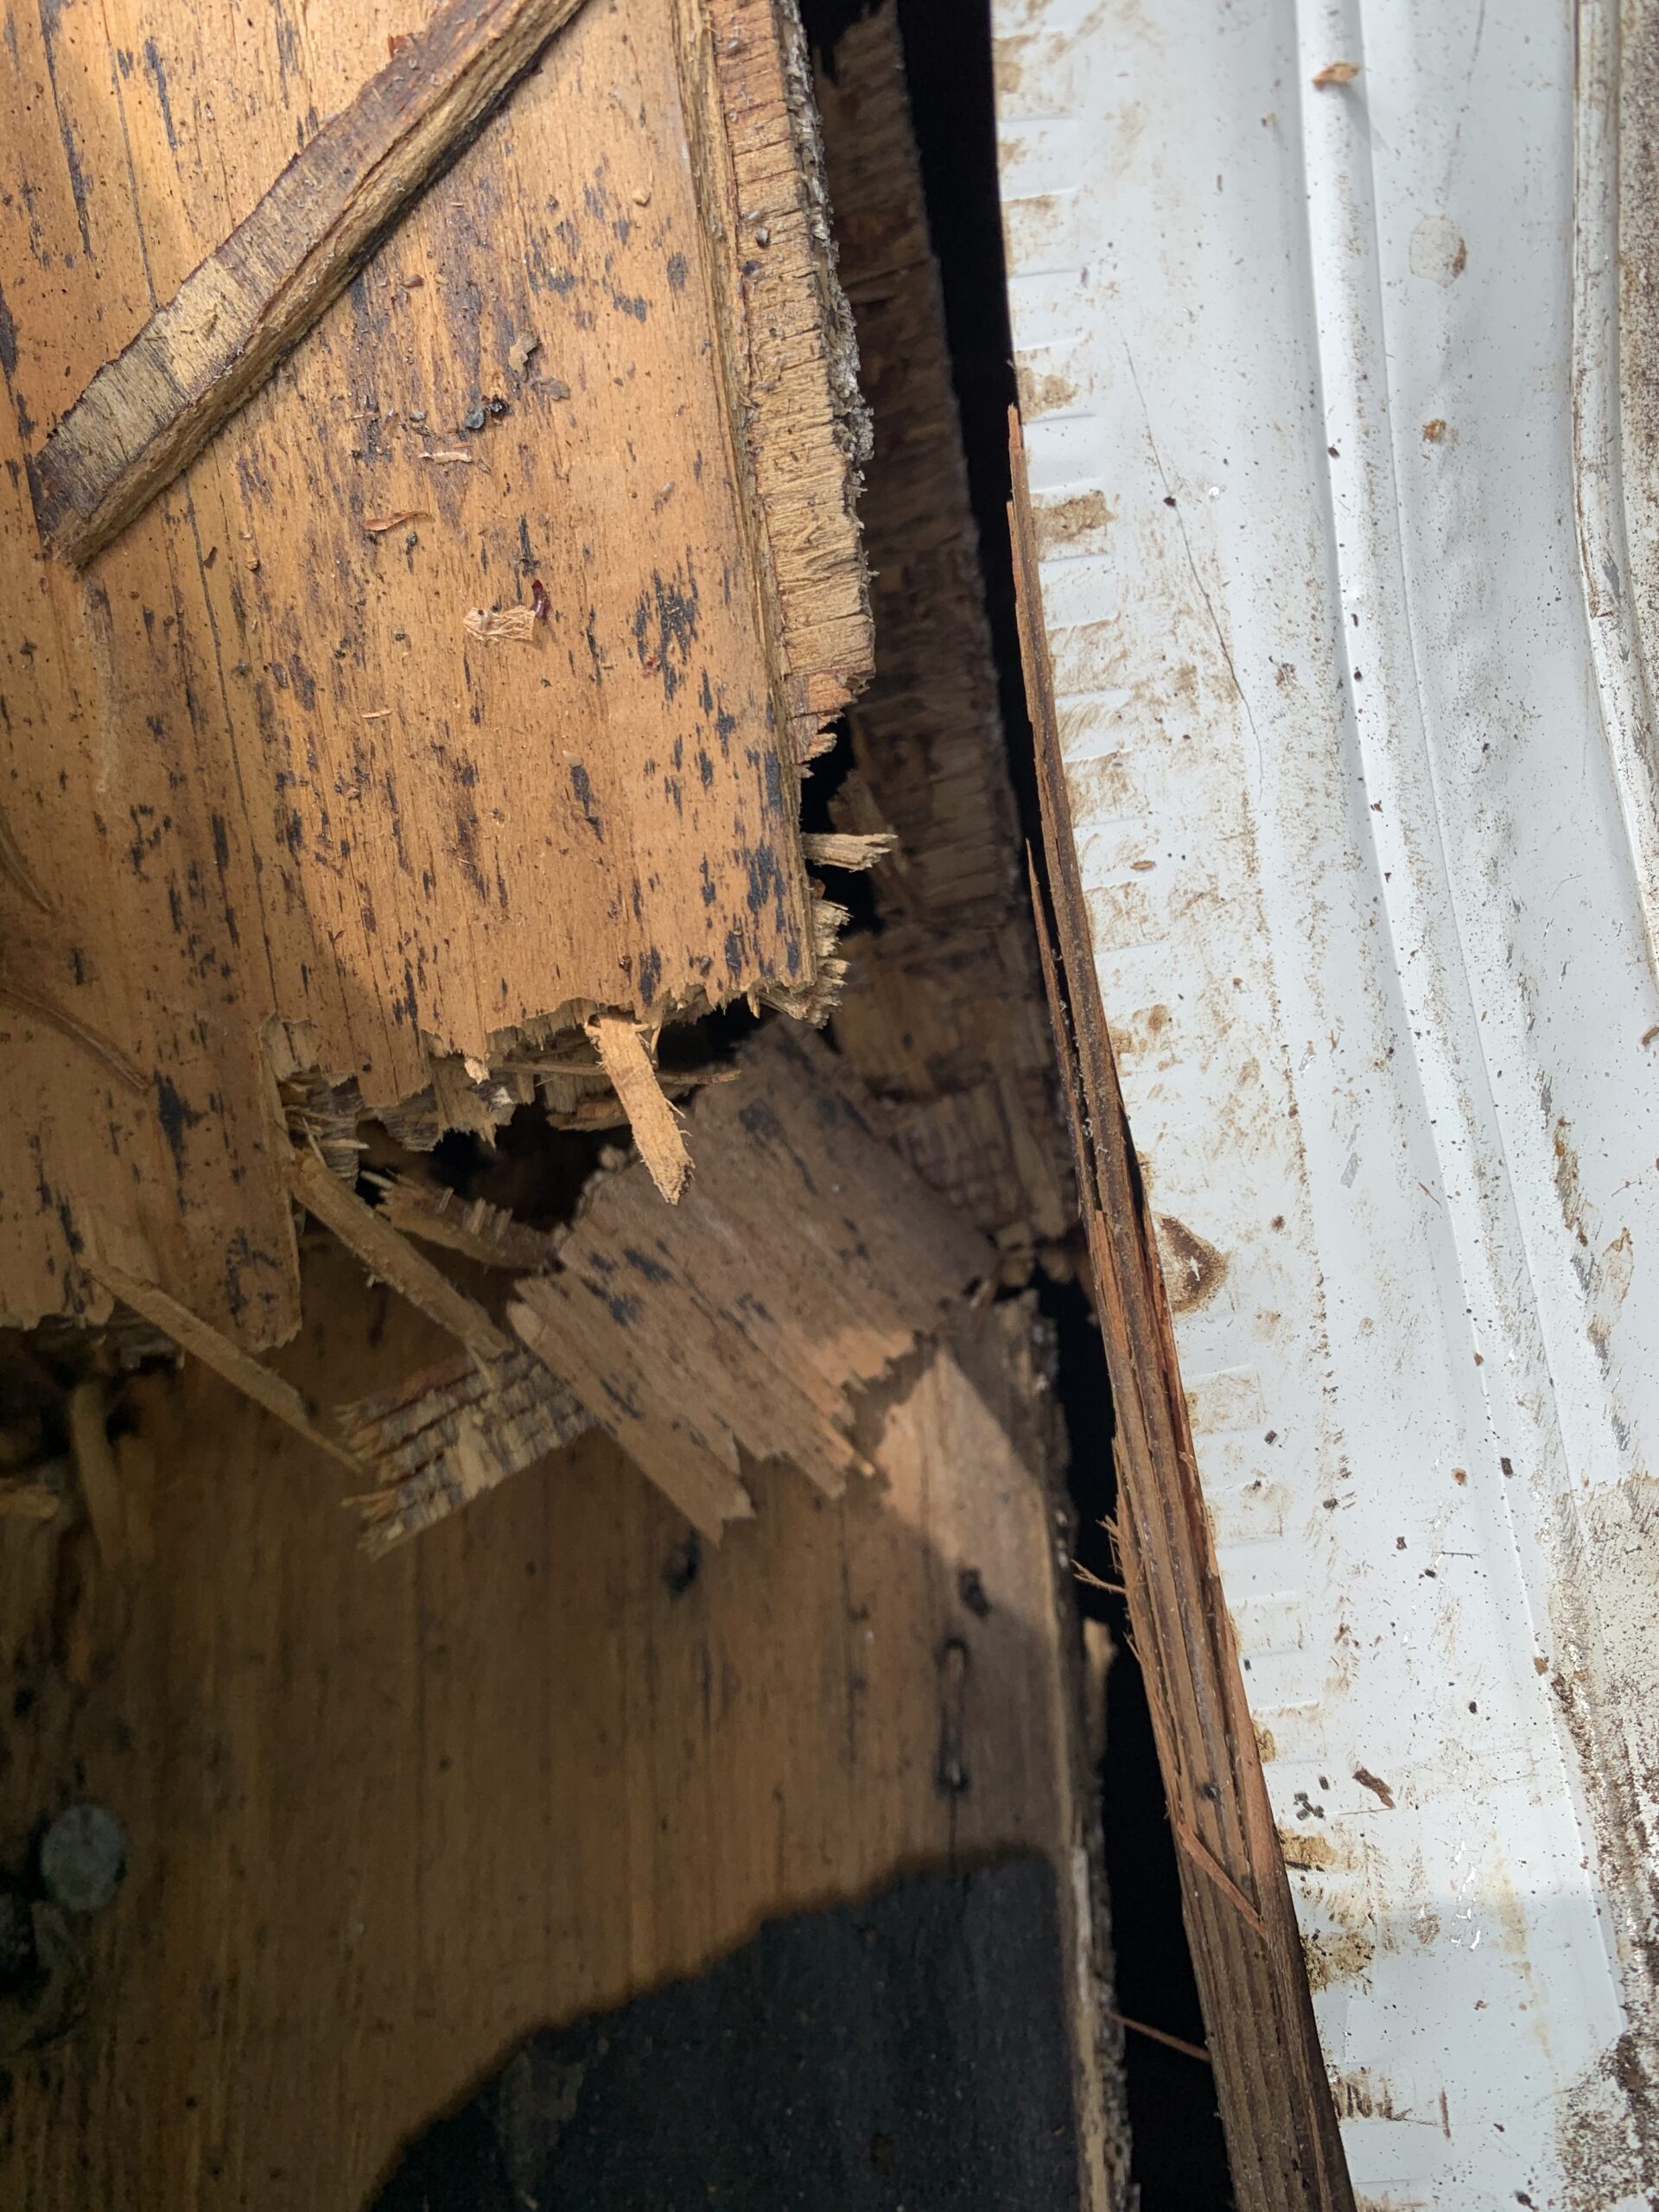 Broken and busted plywood or OSB sheathing can easily go undetected under shingles after an impact